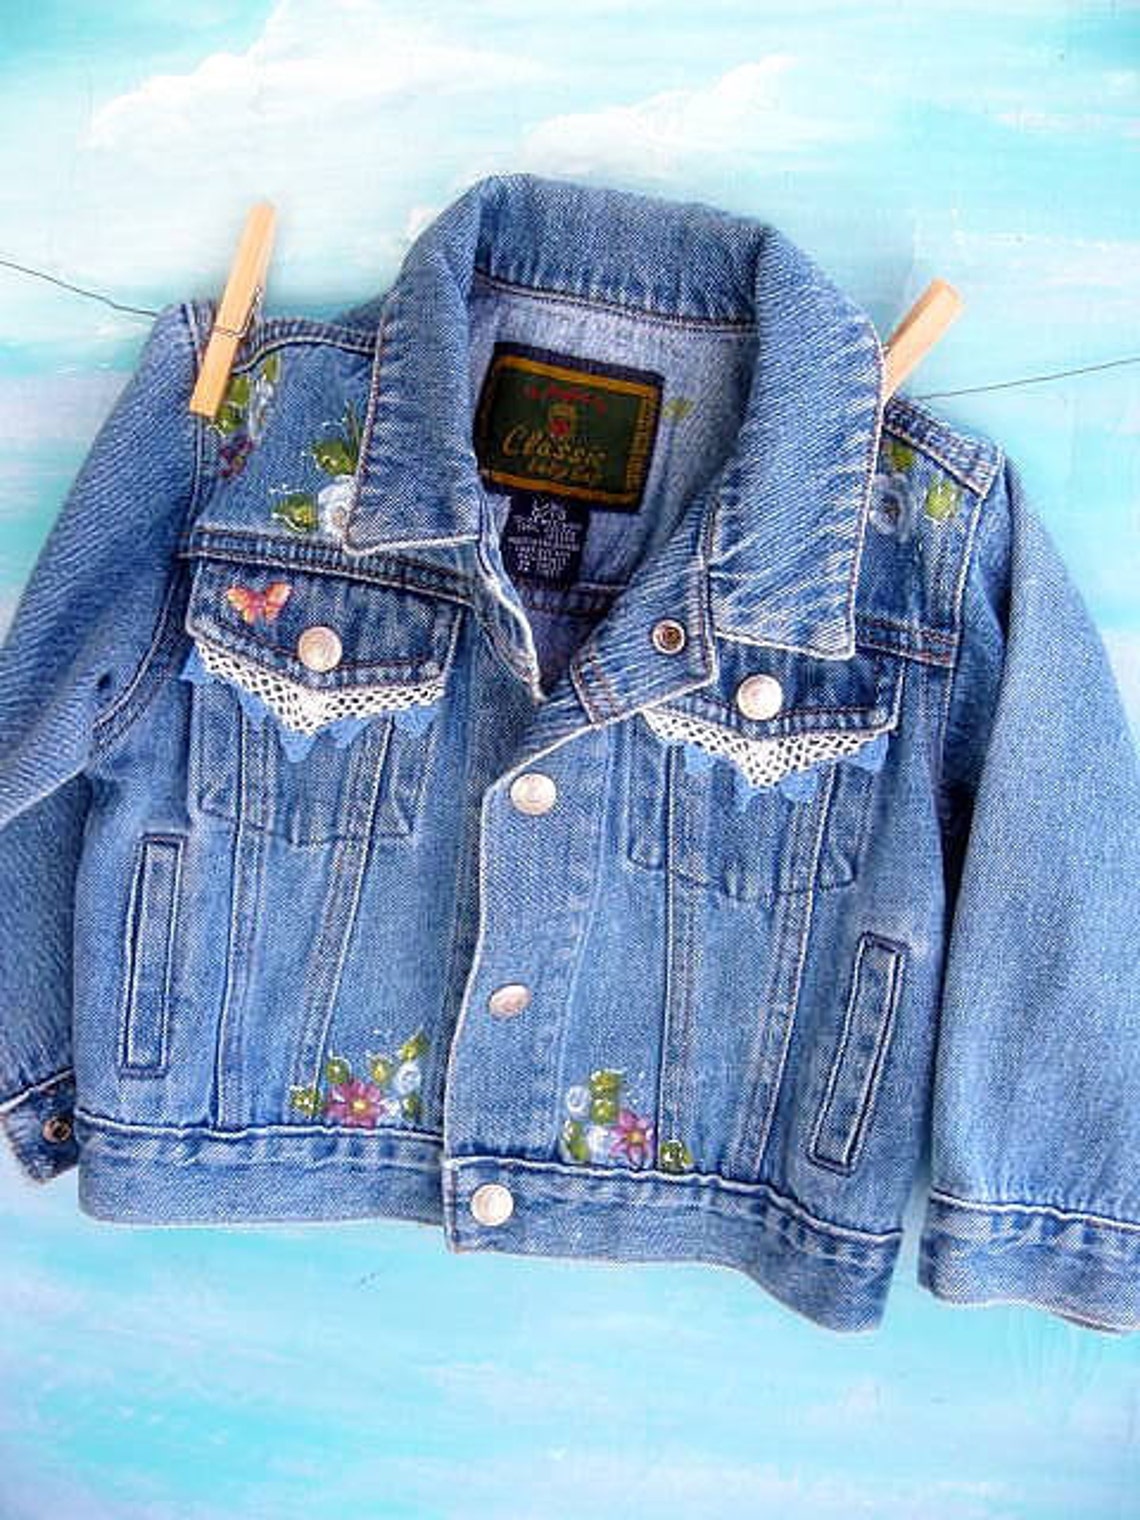 Denim Jacket Upscaled Toddler Painted One to Two years | Etsy